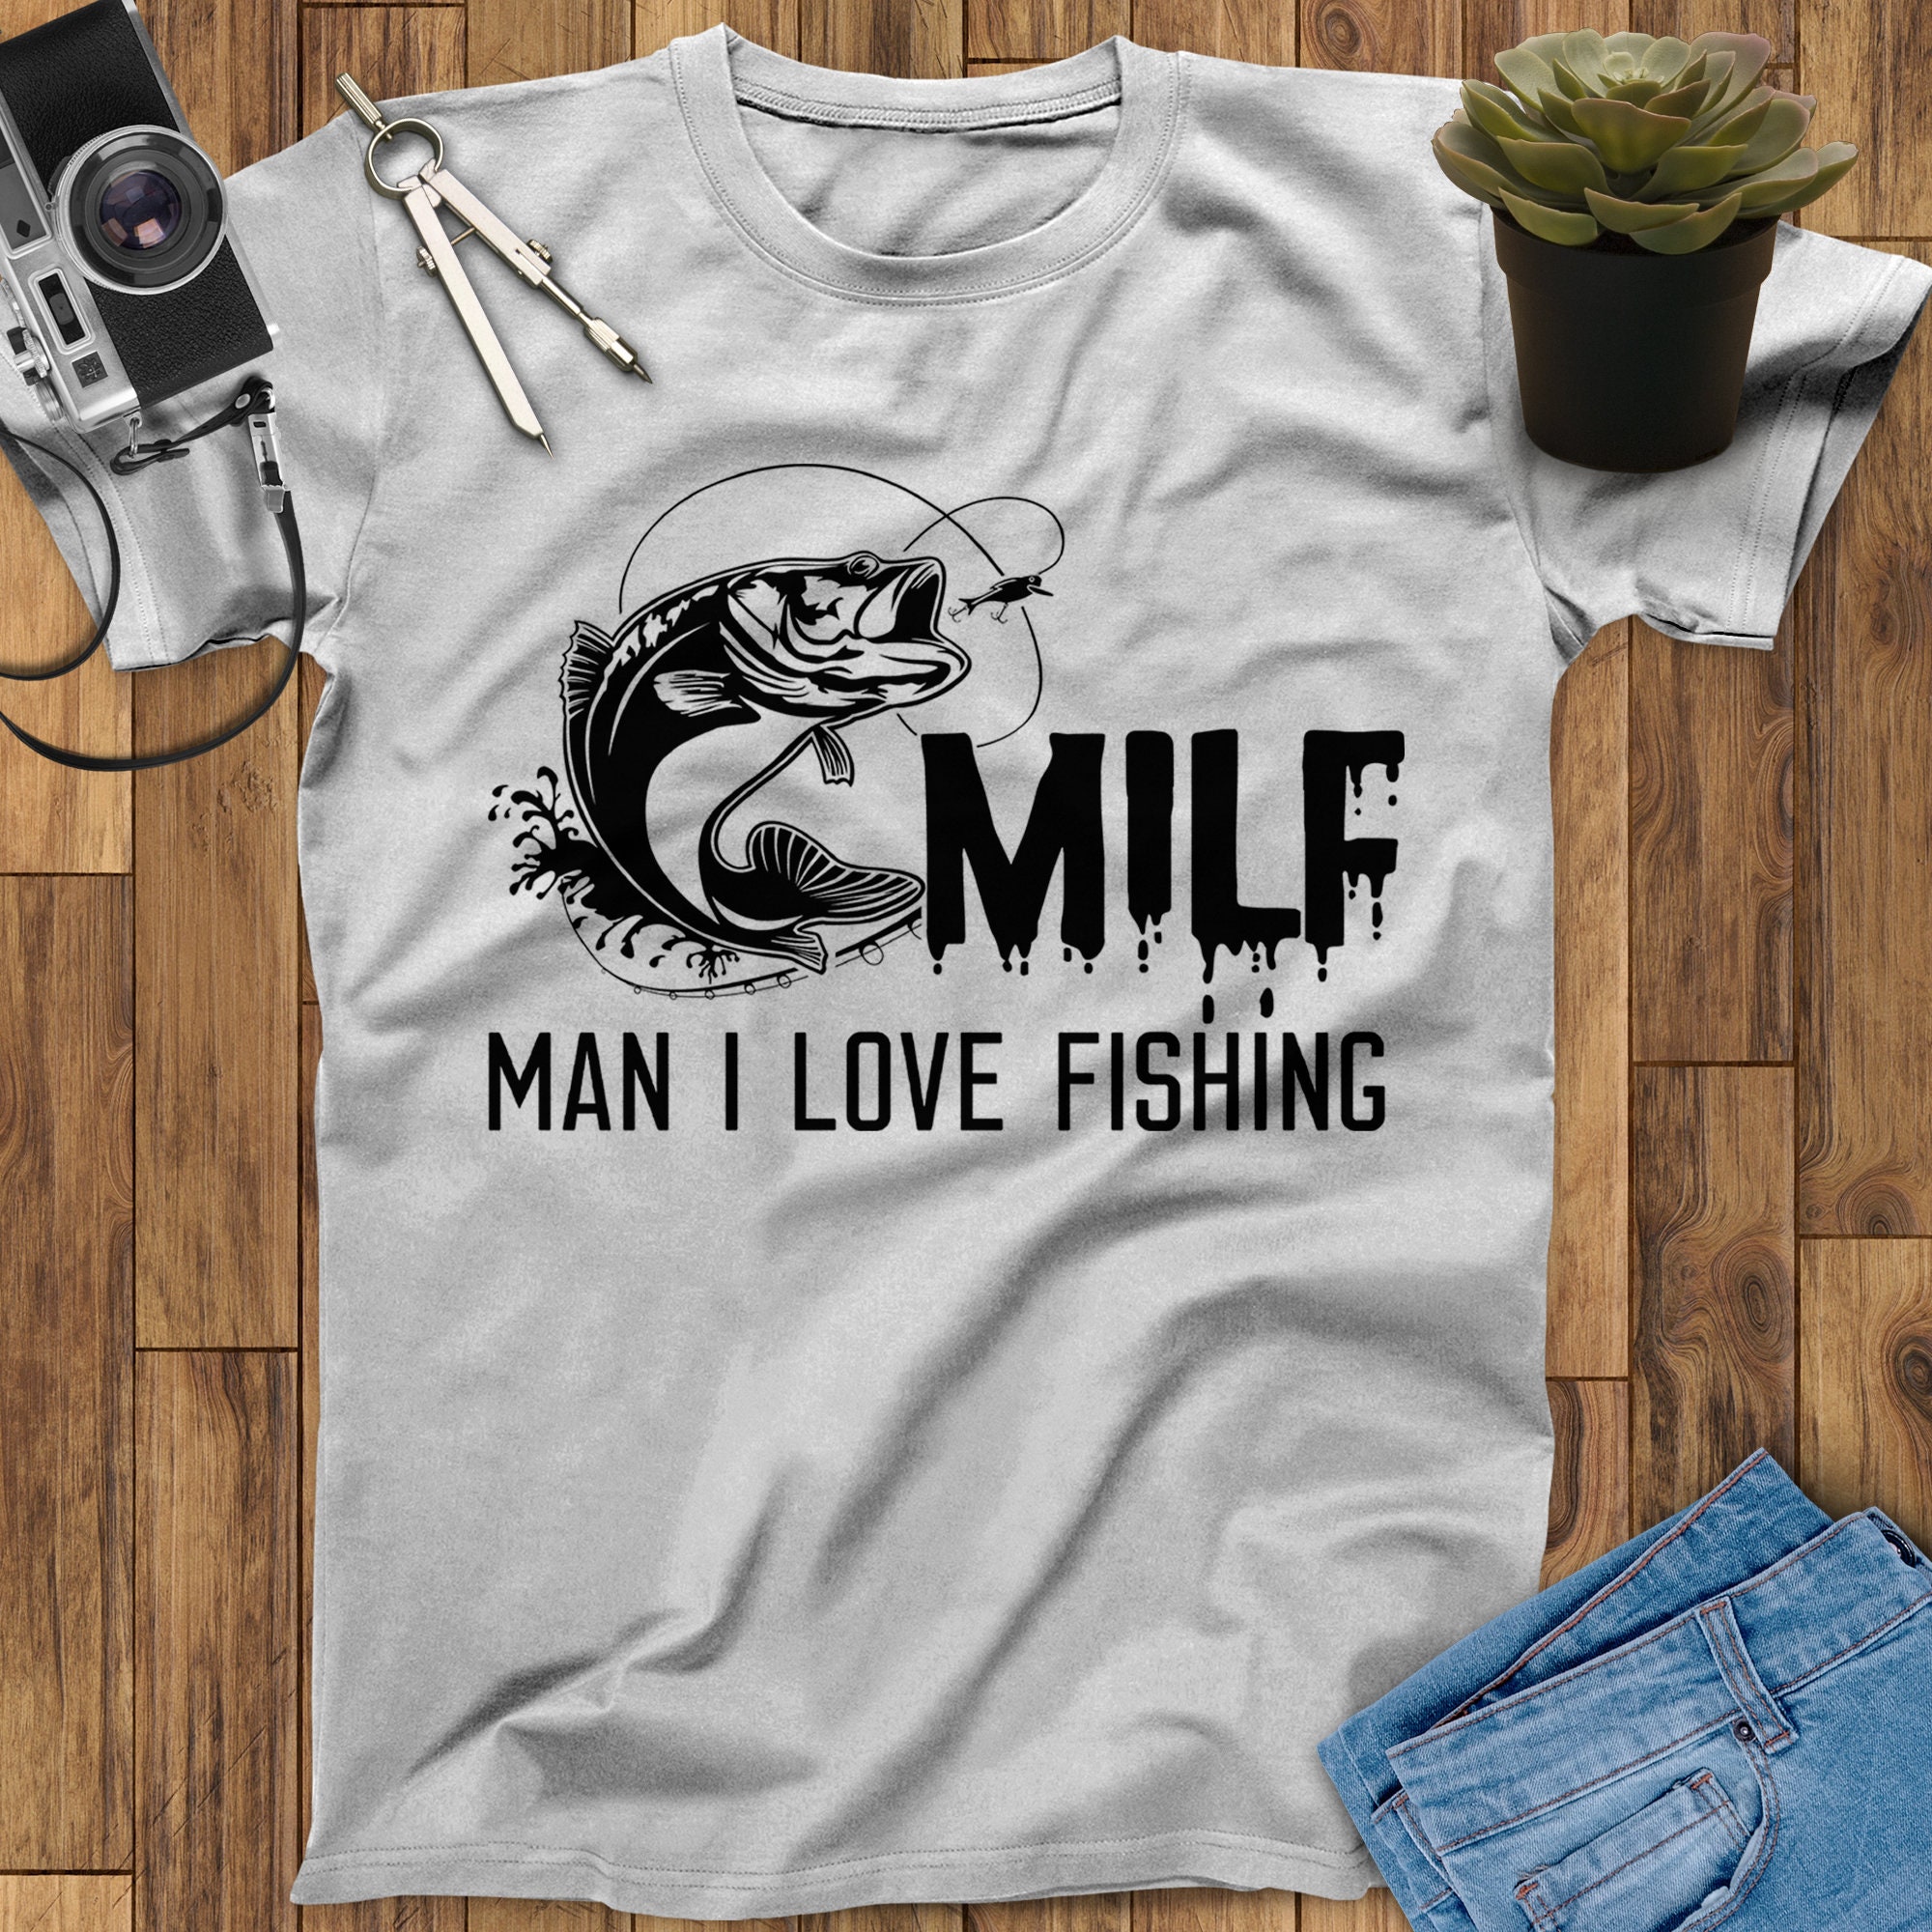 MILF Definition Man I Love Fishing Shirt, Fishing Gift, Fisher Gift,  Father's Day Gift, Gift for Men 